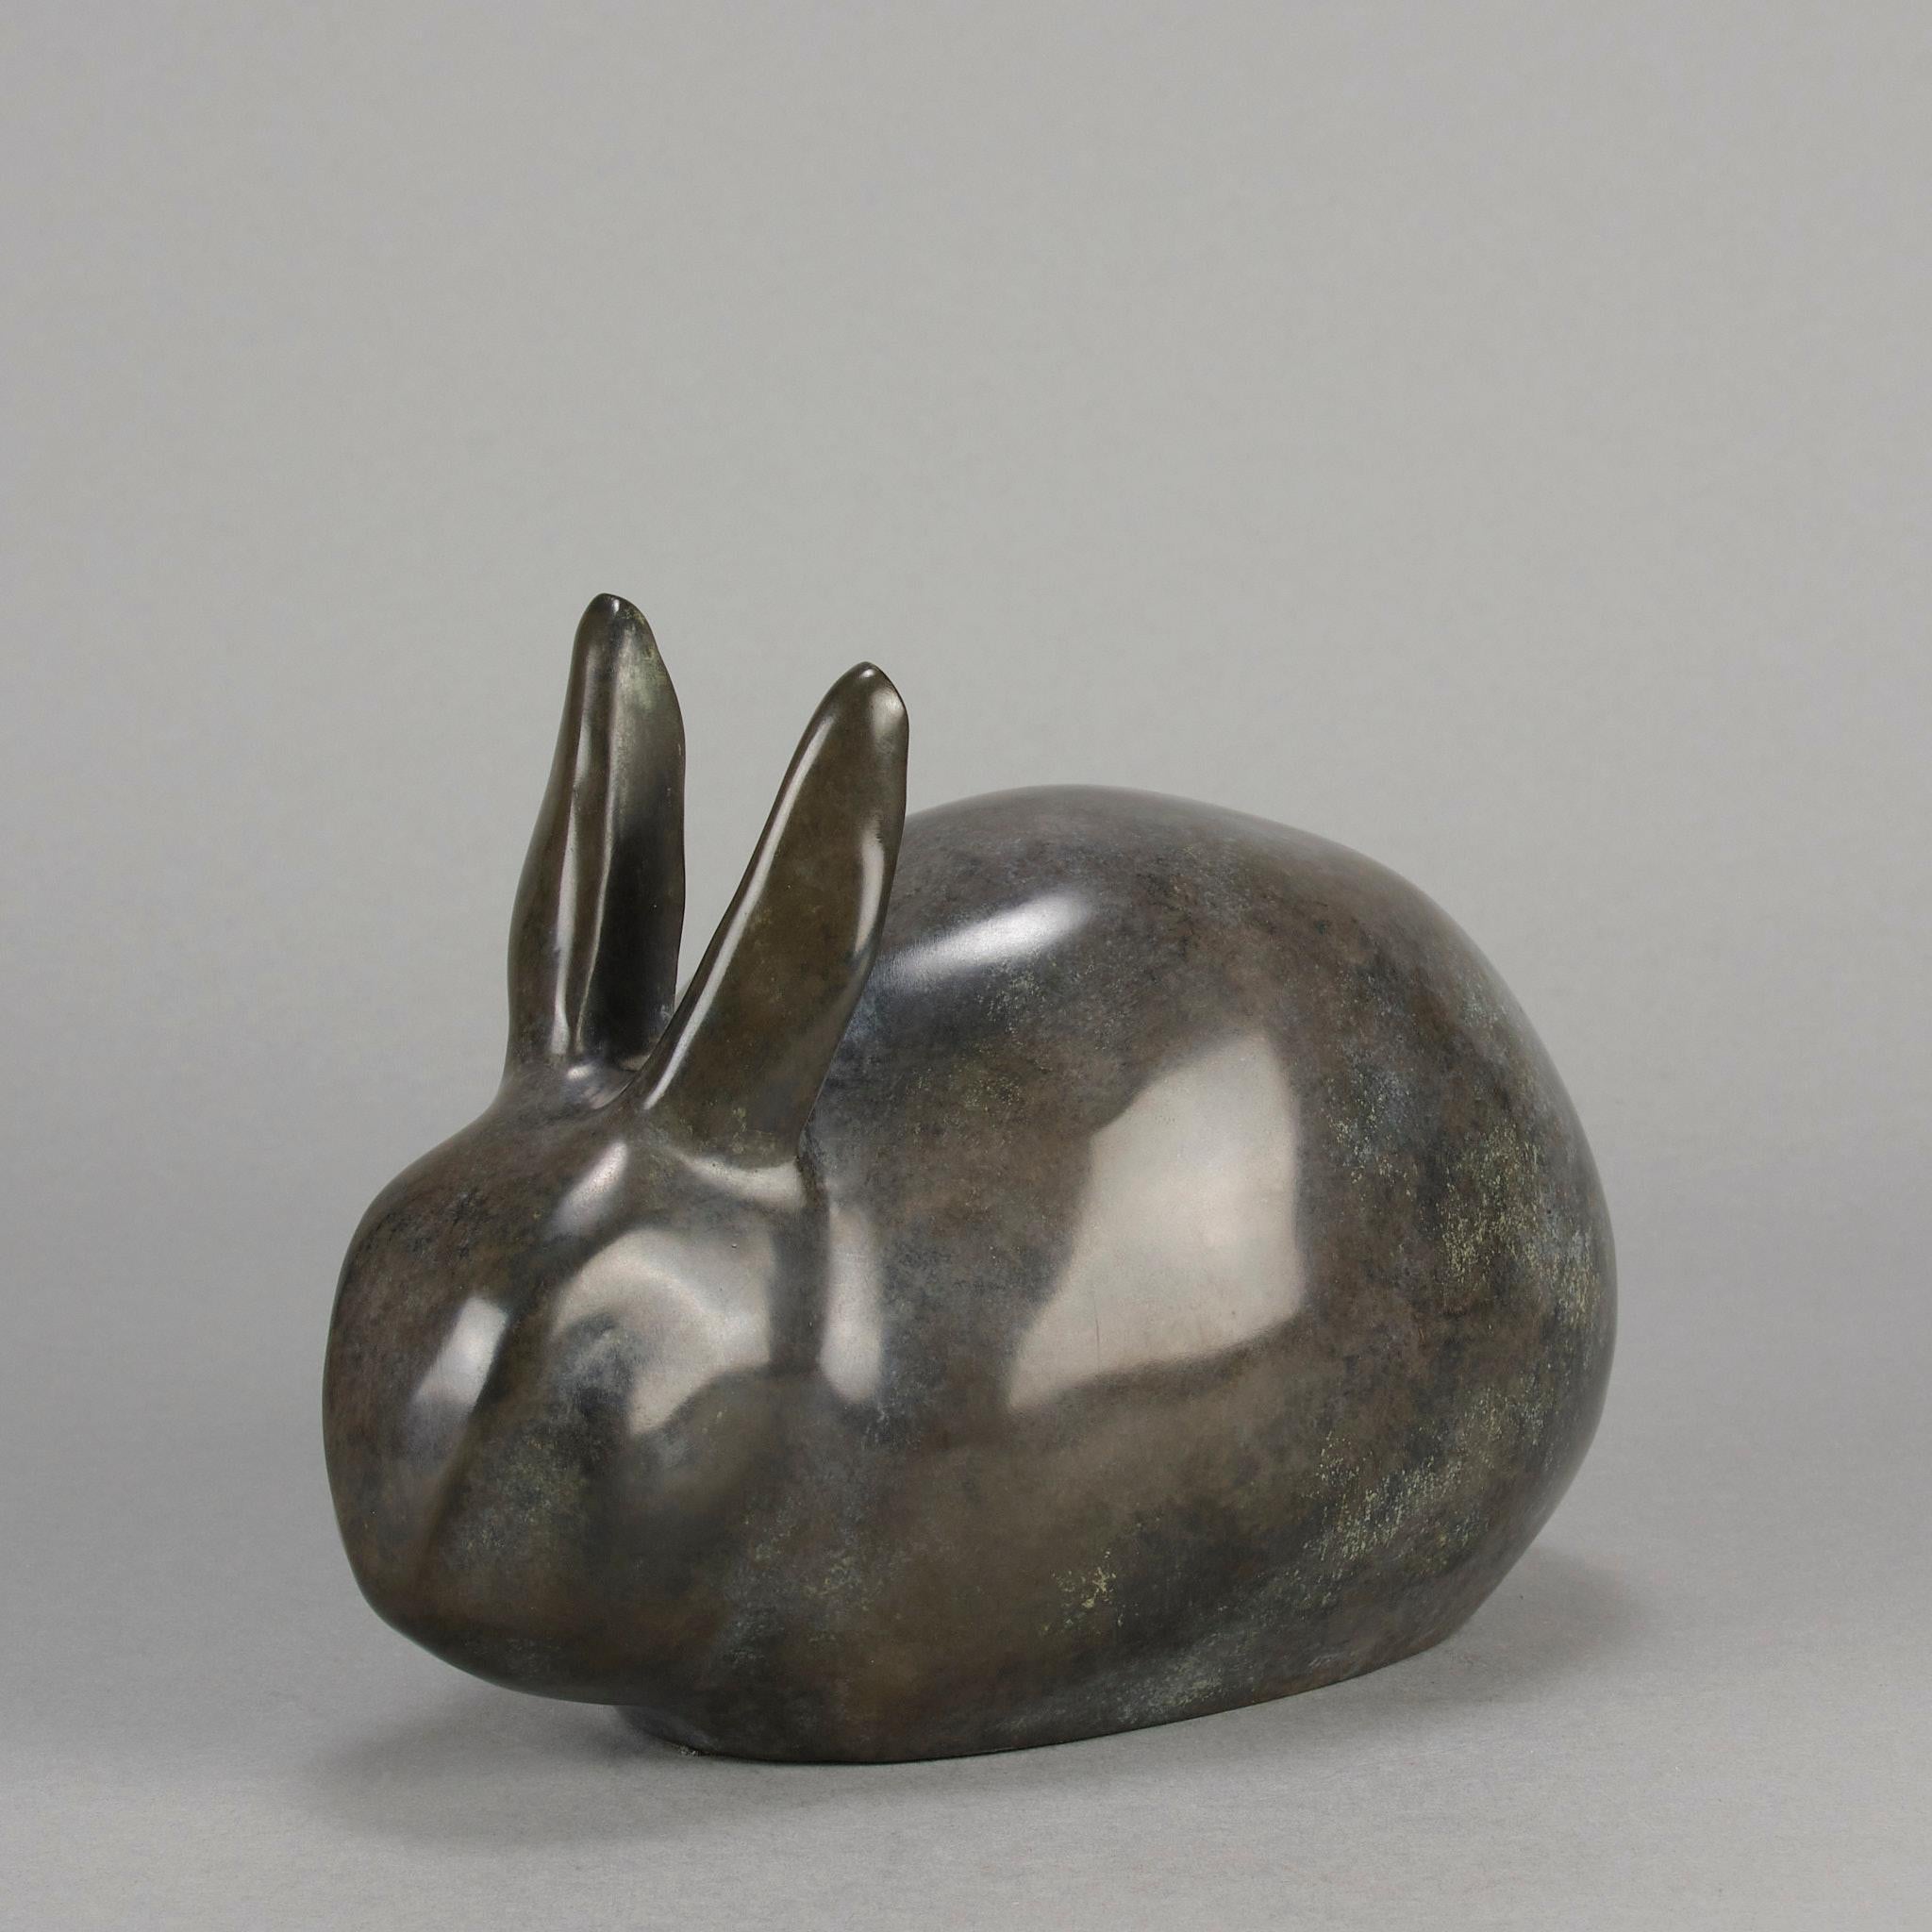 An attractive modern limited edition bronze study of a resting rabbit with excellent smooth tactile surface and good colour, signed, numbered and stamped Landowski Foundry ~ Cire Perdue, monogrammed L S A

ADDITIONAL INFORMATION
Height:             